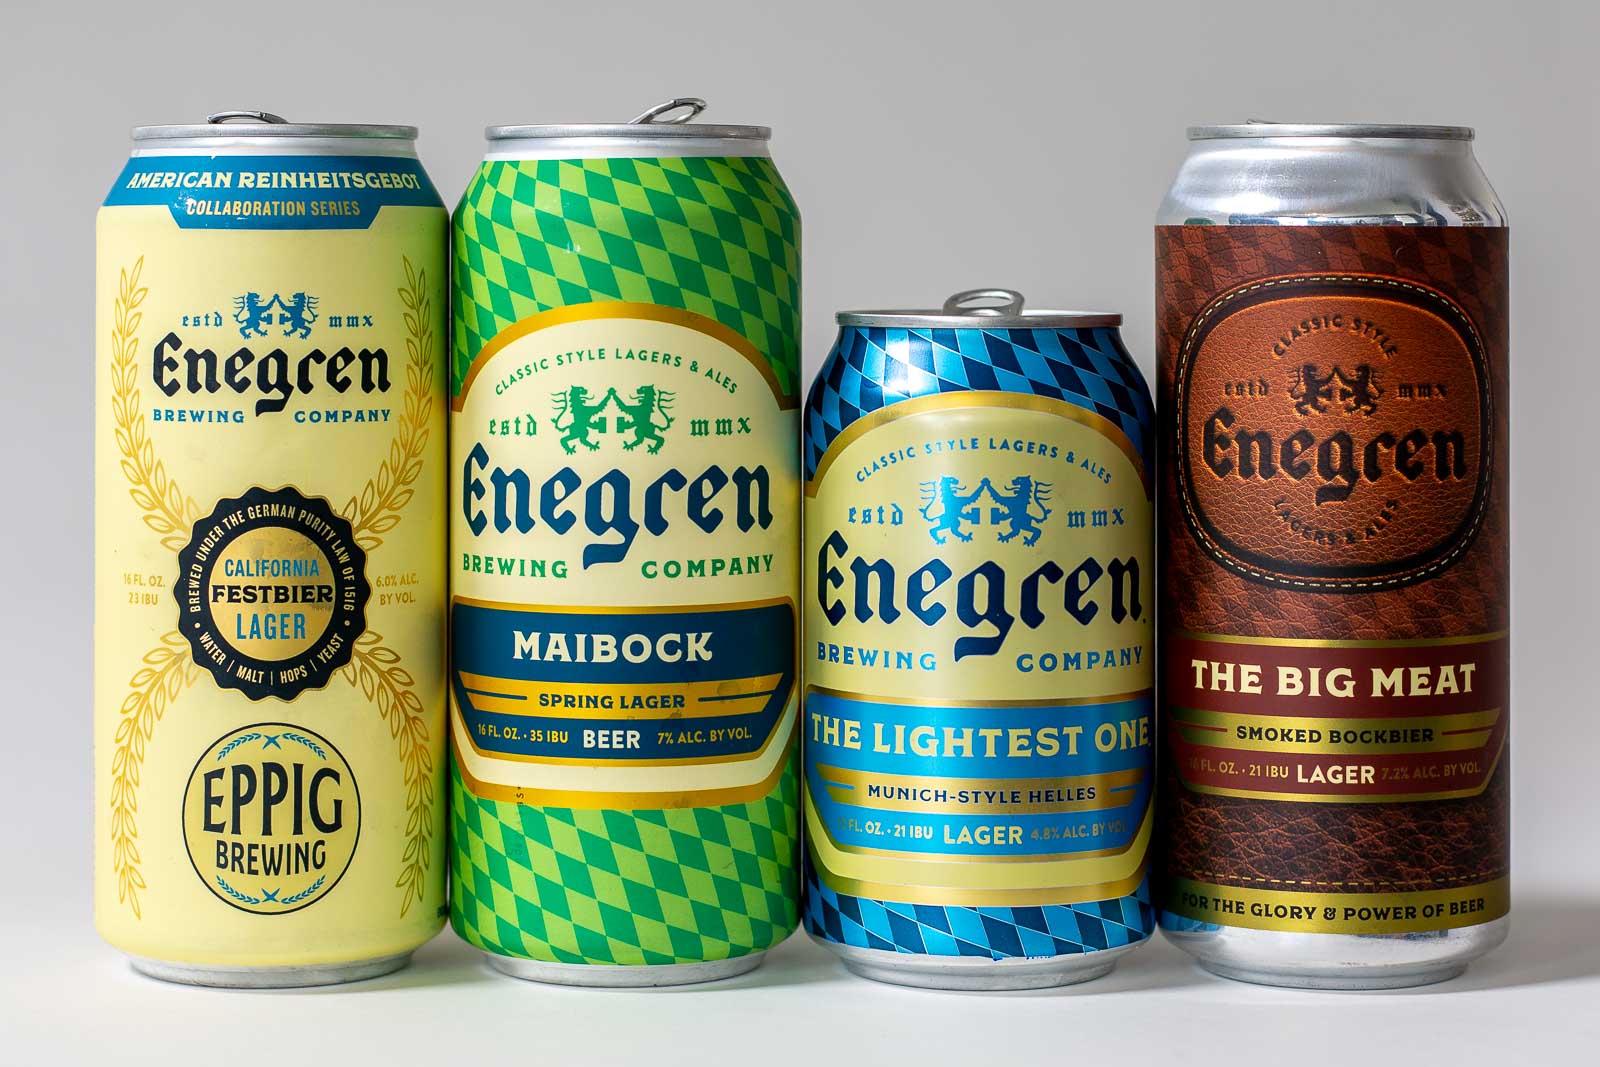 Pictured: Beers from Enegren Brewing Company in cans.